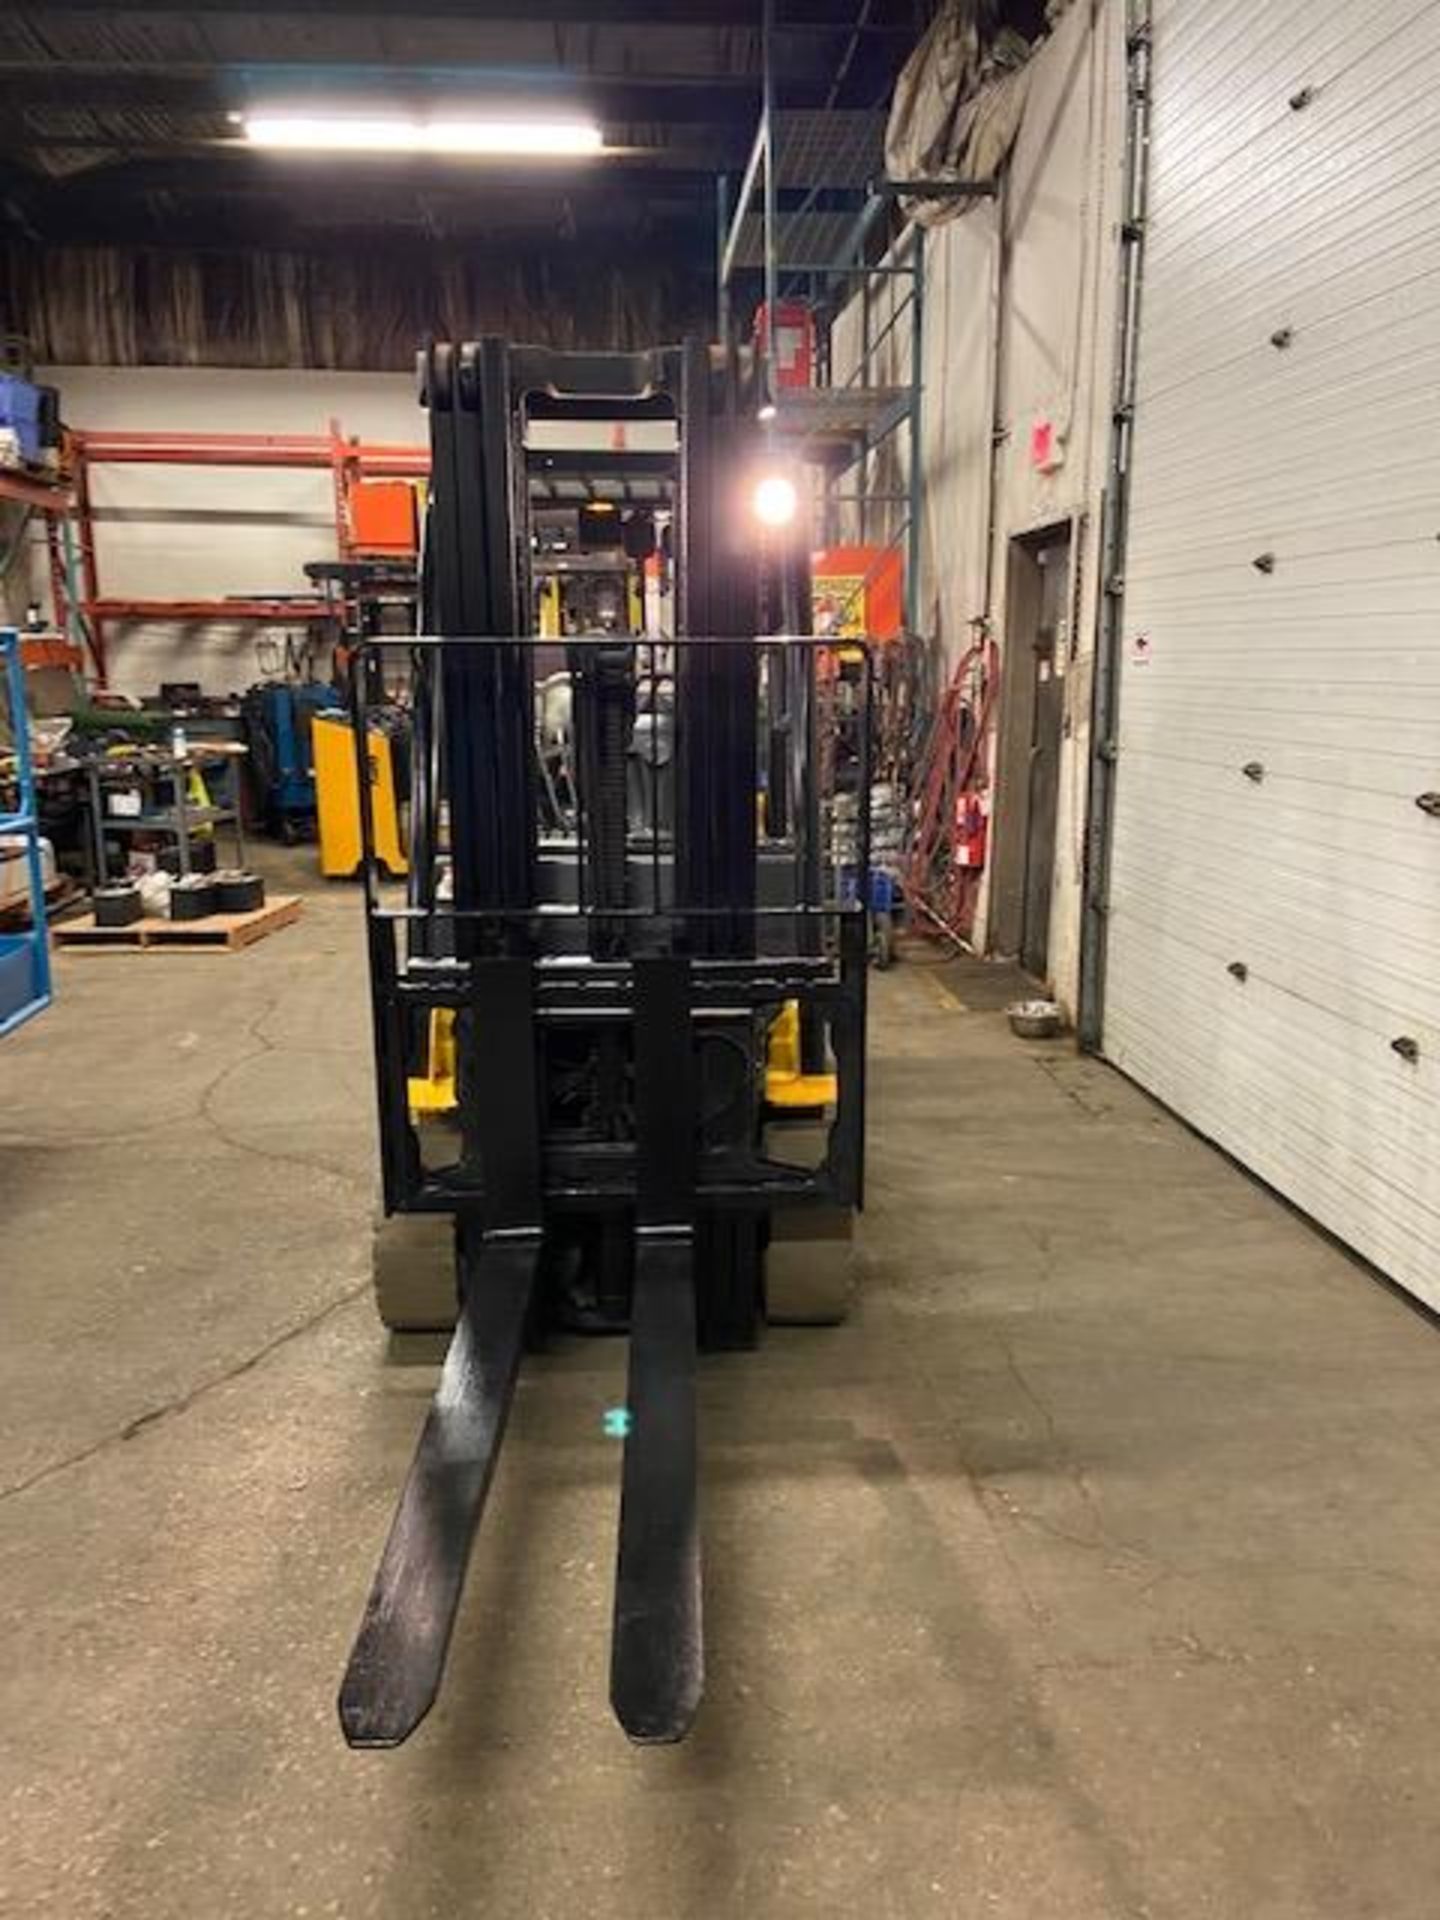 FREE CUSTOMS - 2016 Yale 6000lbs Capacity Forklift LPG (propane) with 3-STAGE MAST with - Image 2 of 3